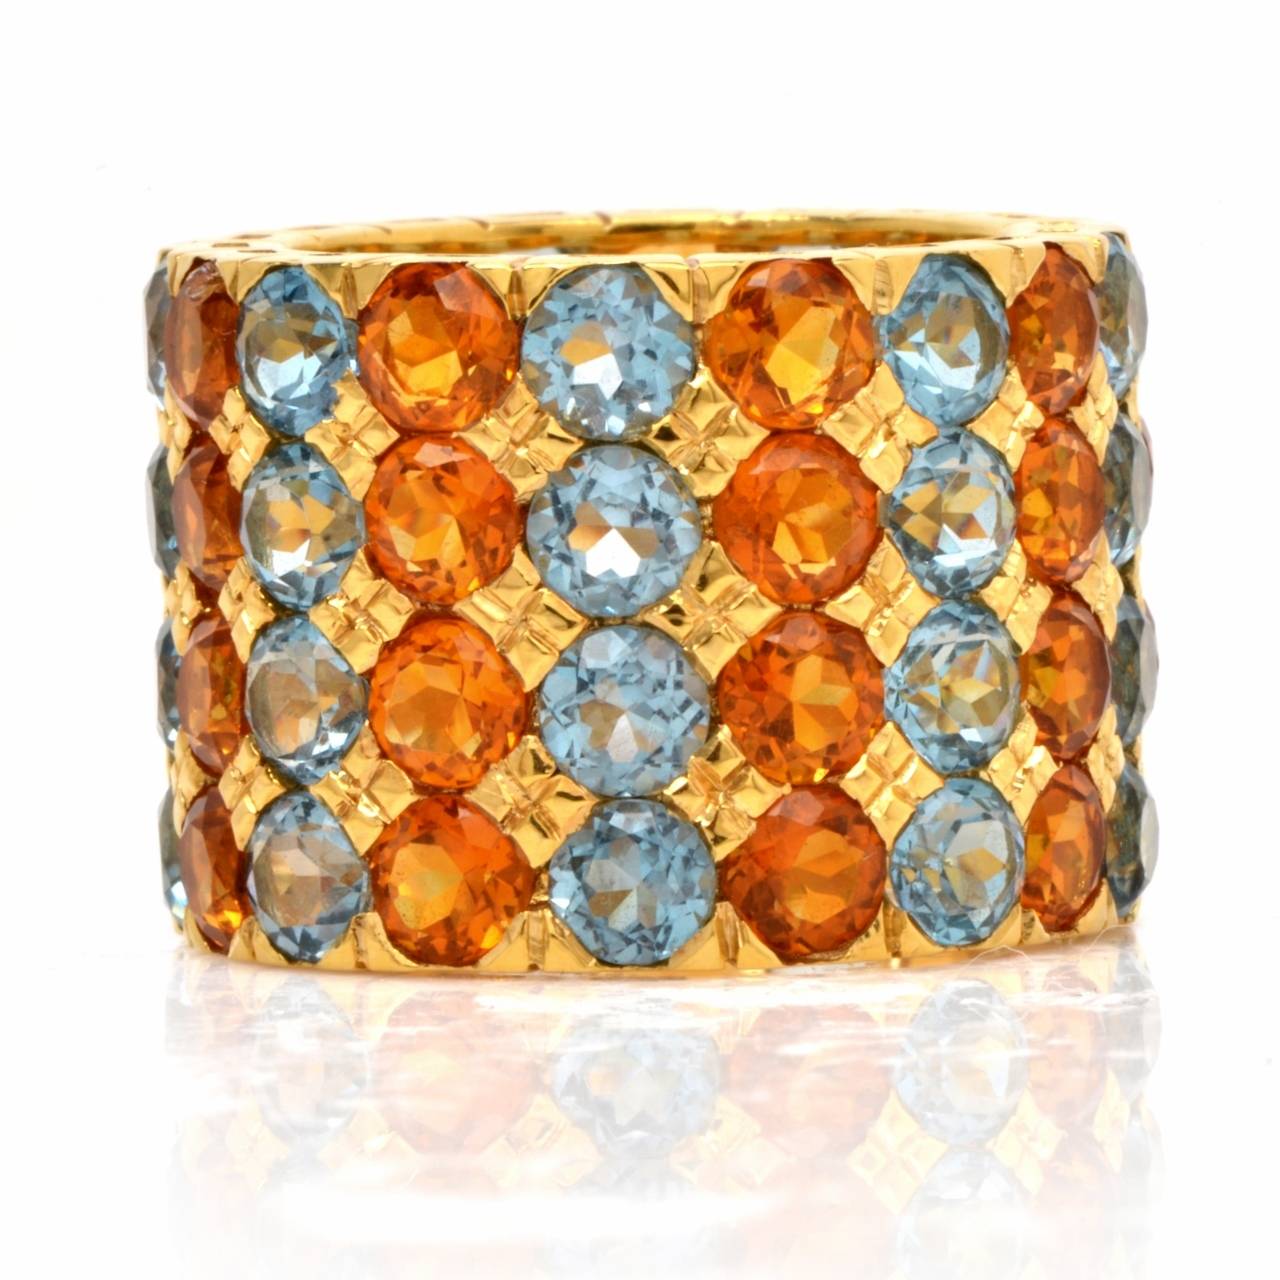 This immaculately crafted  wide band  of vivacious aesthetic and artful craftsmanship is constructed in solid 18K yellow gold, weighs 14.00 grams and measures 17 mm wide.   This colorful  band is adorned with 8 vertical rows of  32 round-faceted